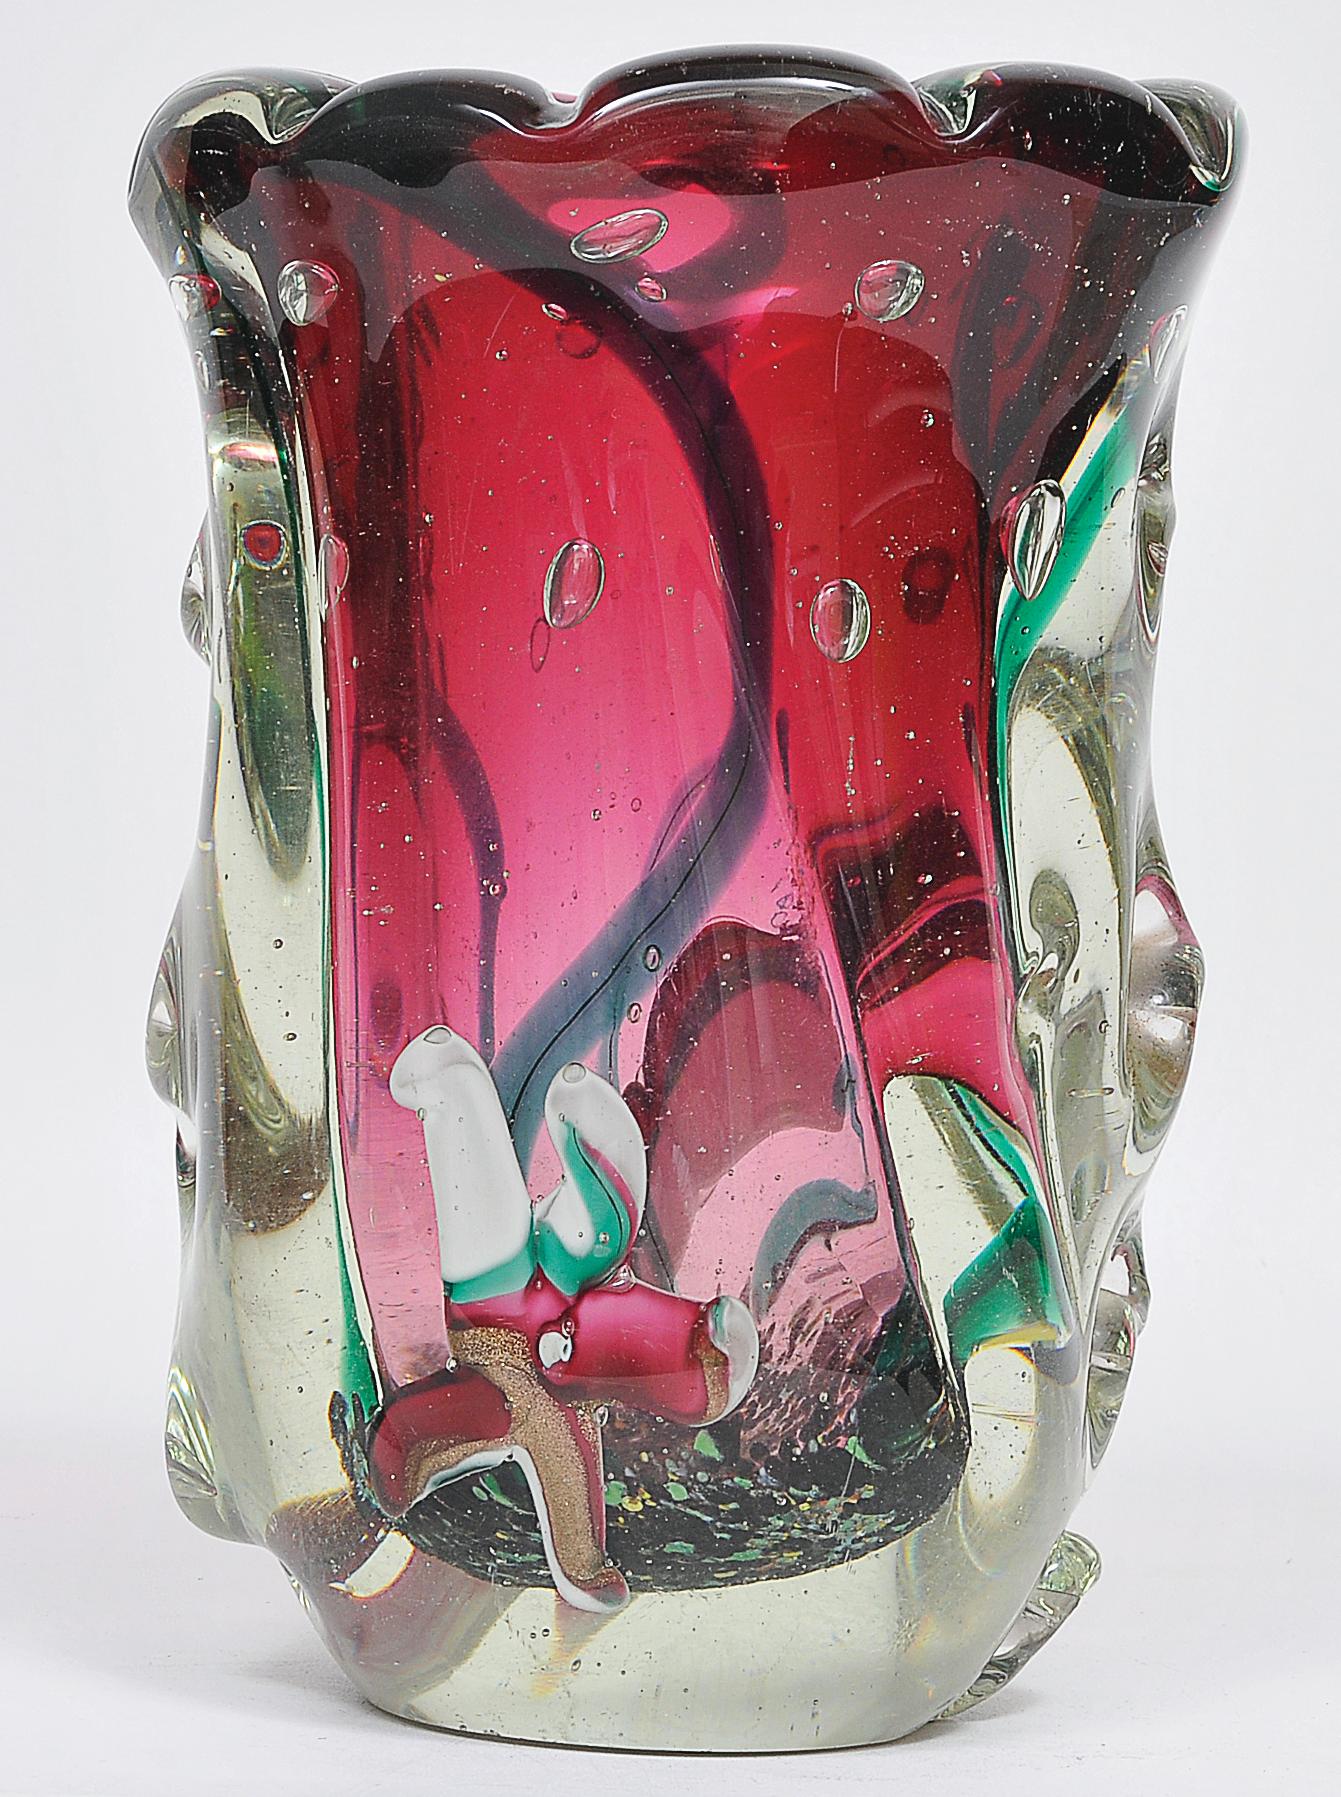 Incredible Handblown glass vase
Designed by Dino Martens, made by FRATELLI TOSO, 
circa 1950. With marine Motifs of Starfish, squid and aquatic plants.